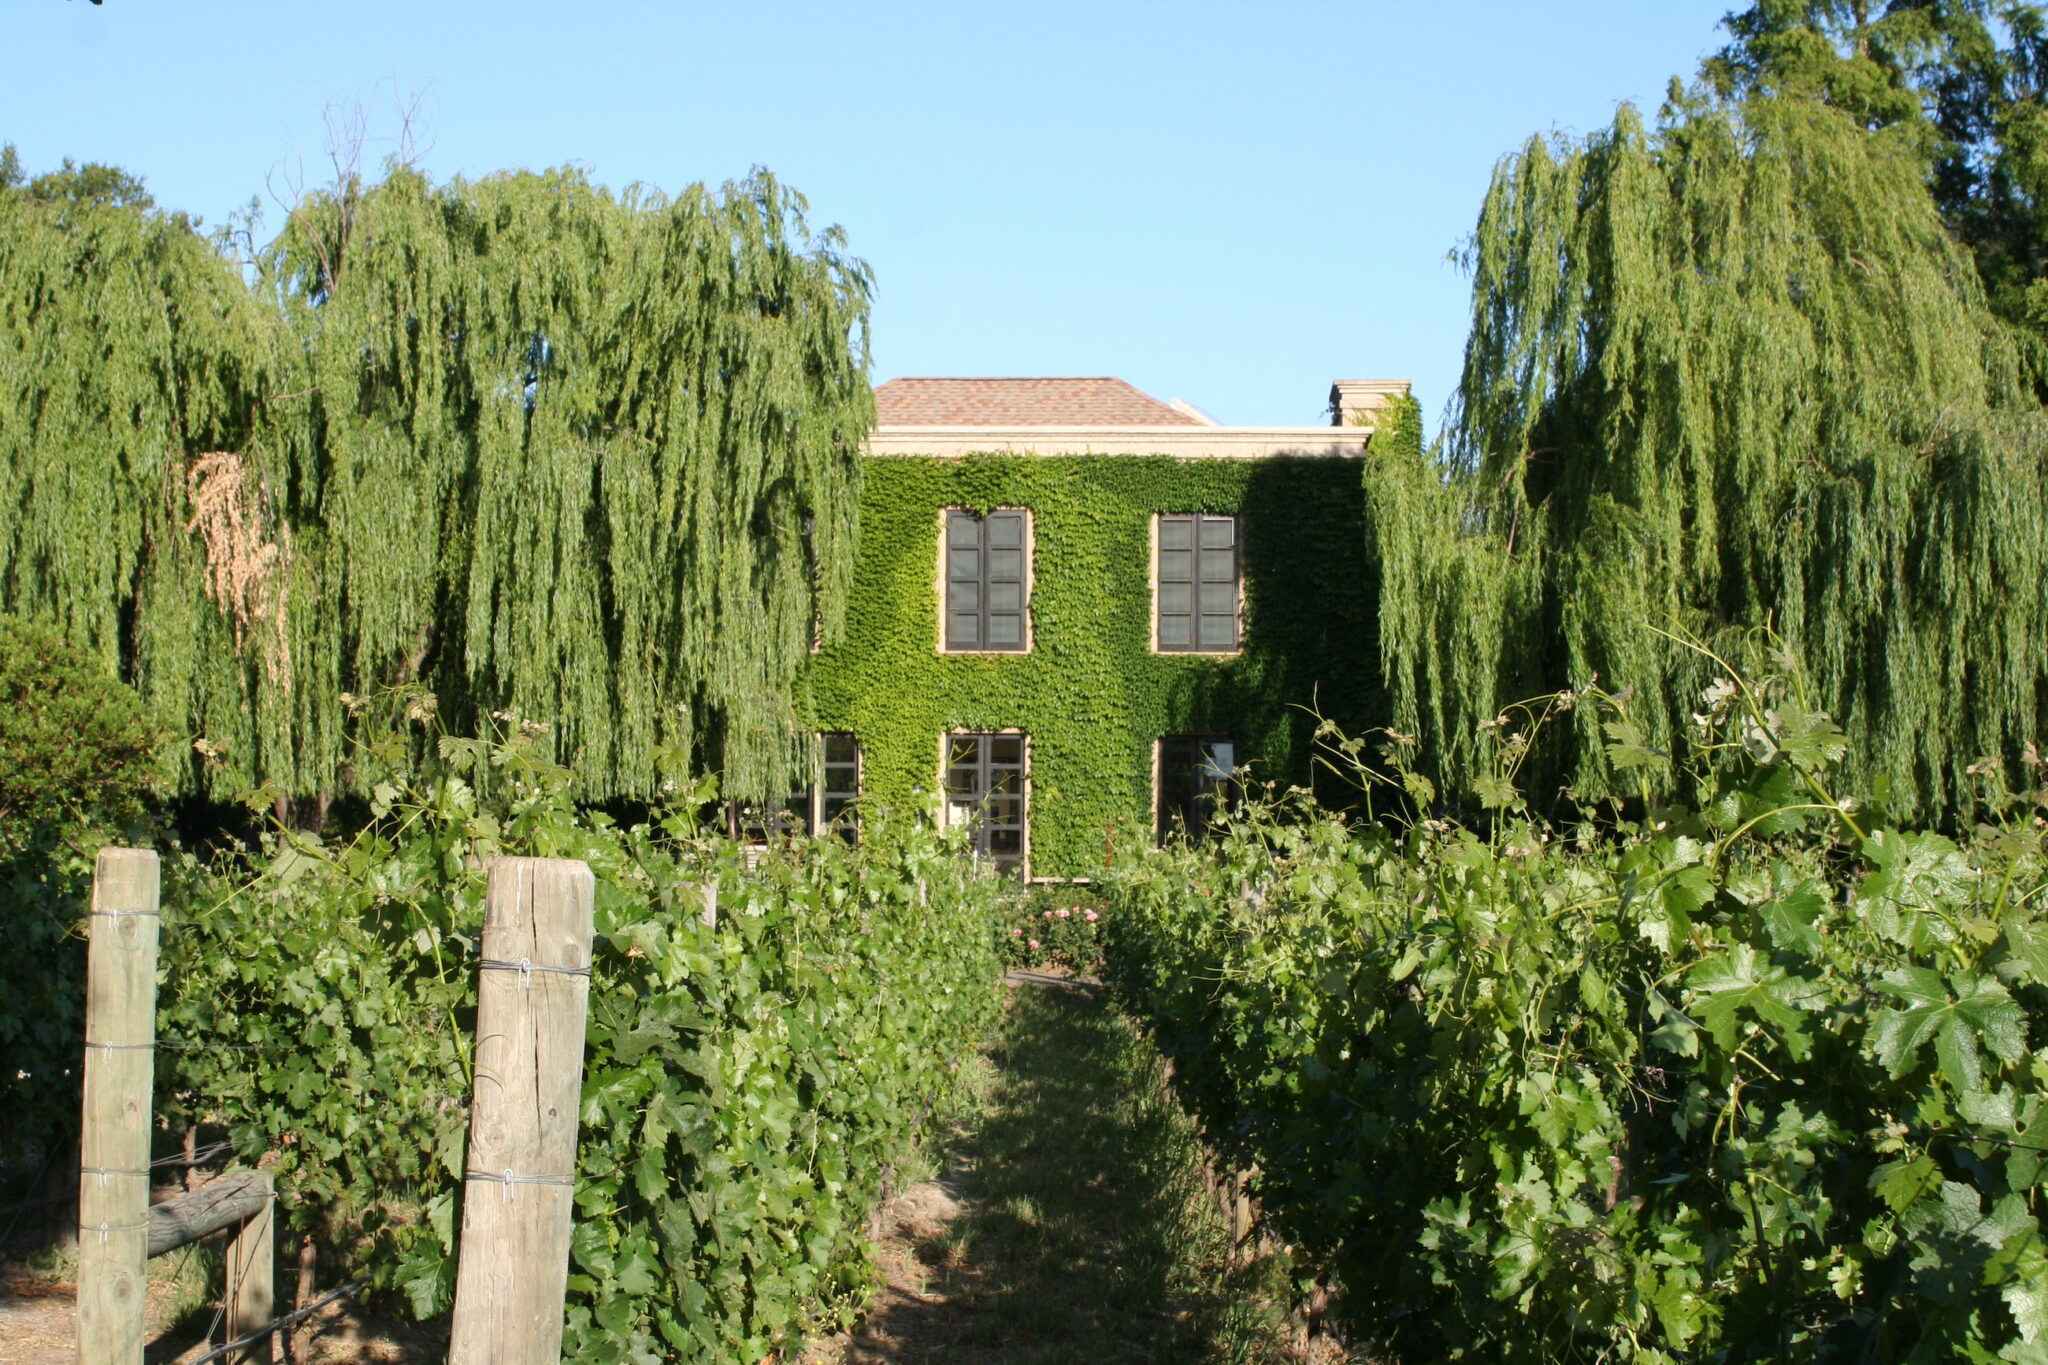 Estate house covered in vines and surrounded by trees.